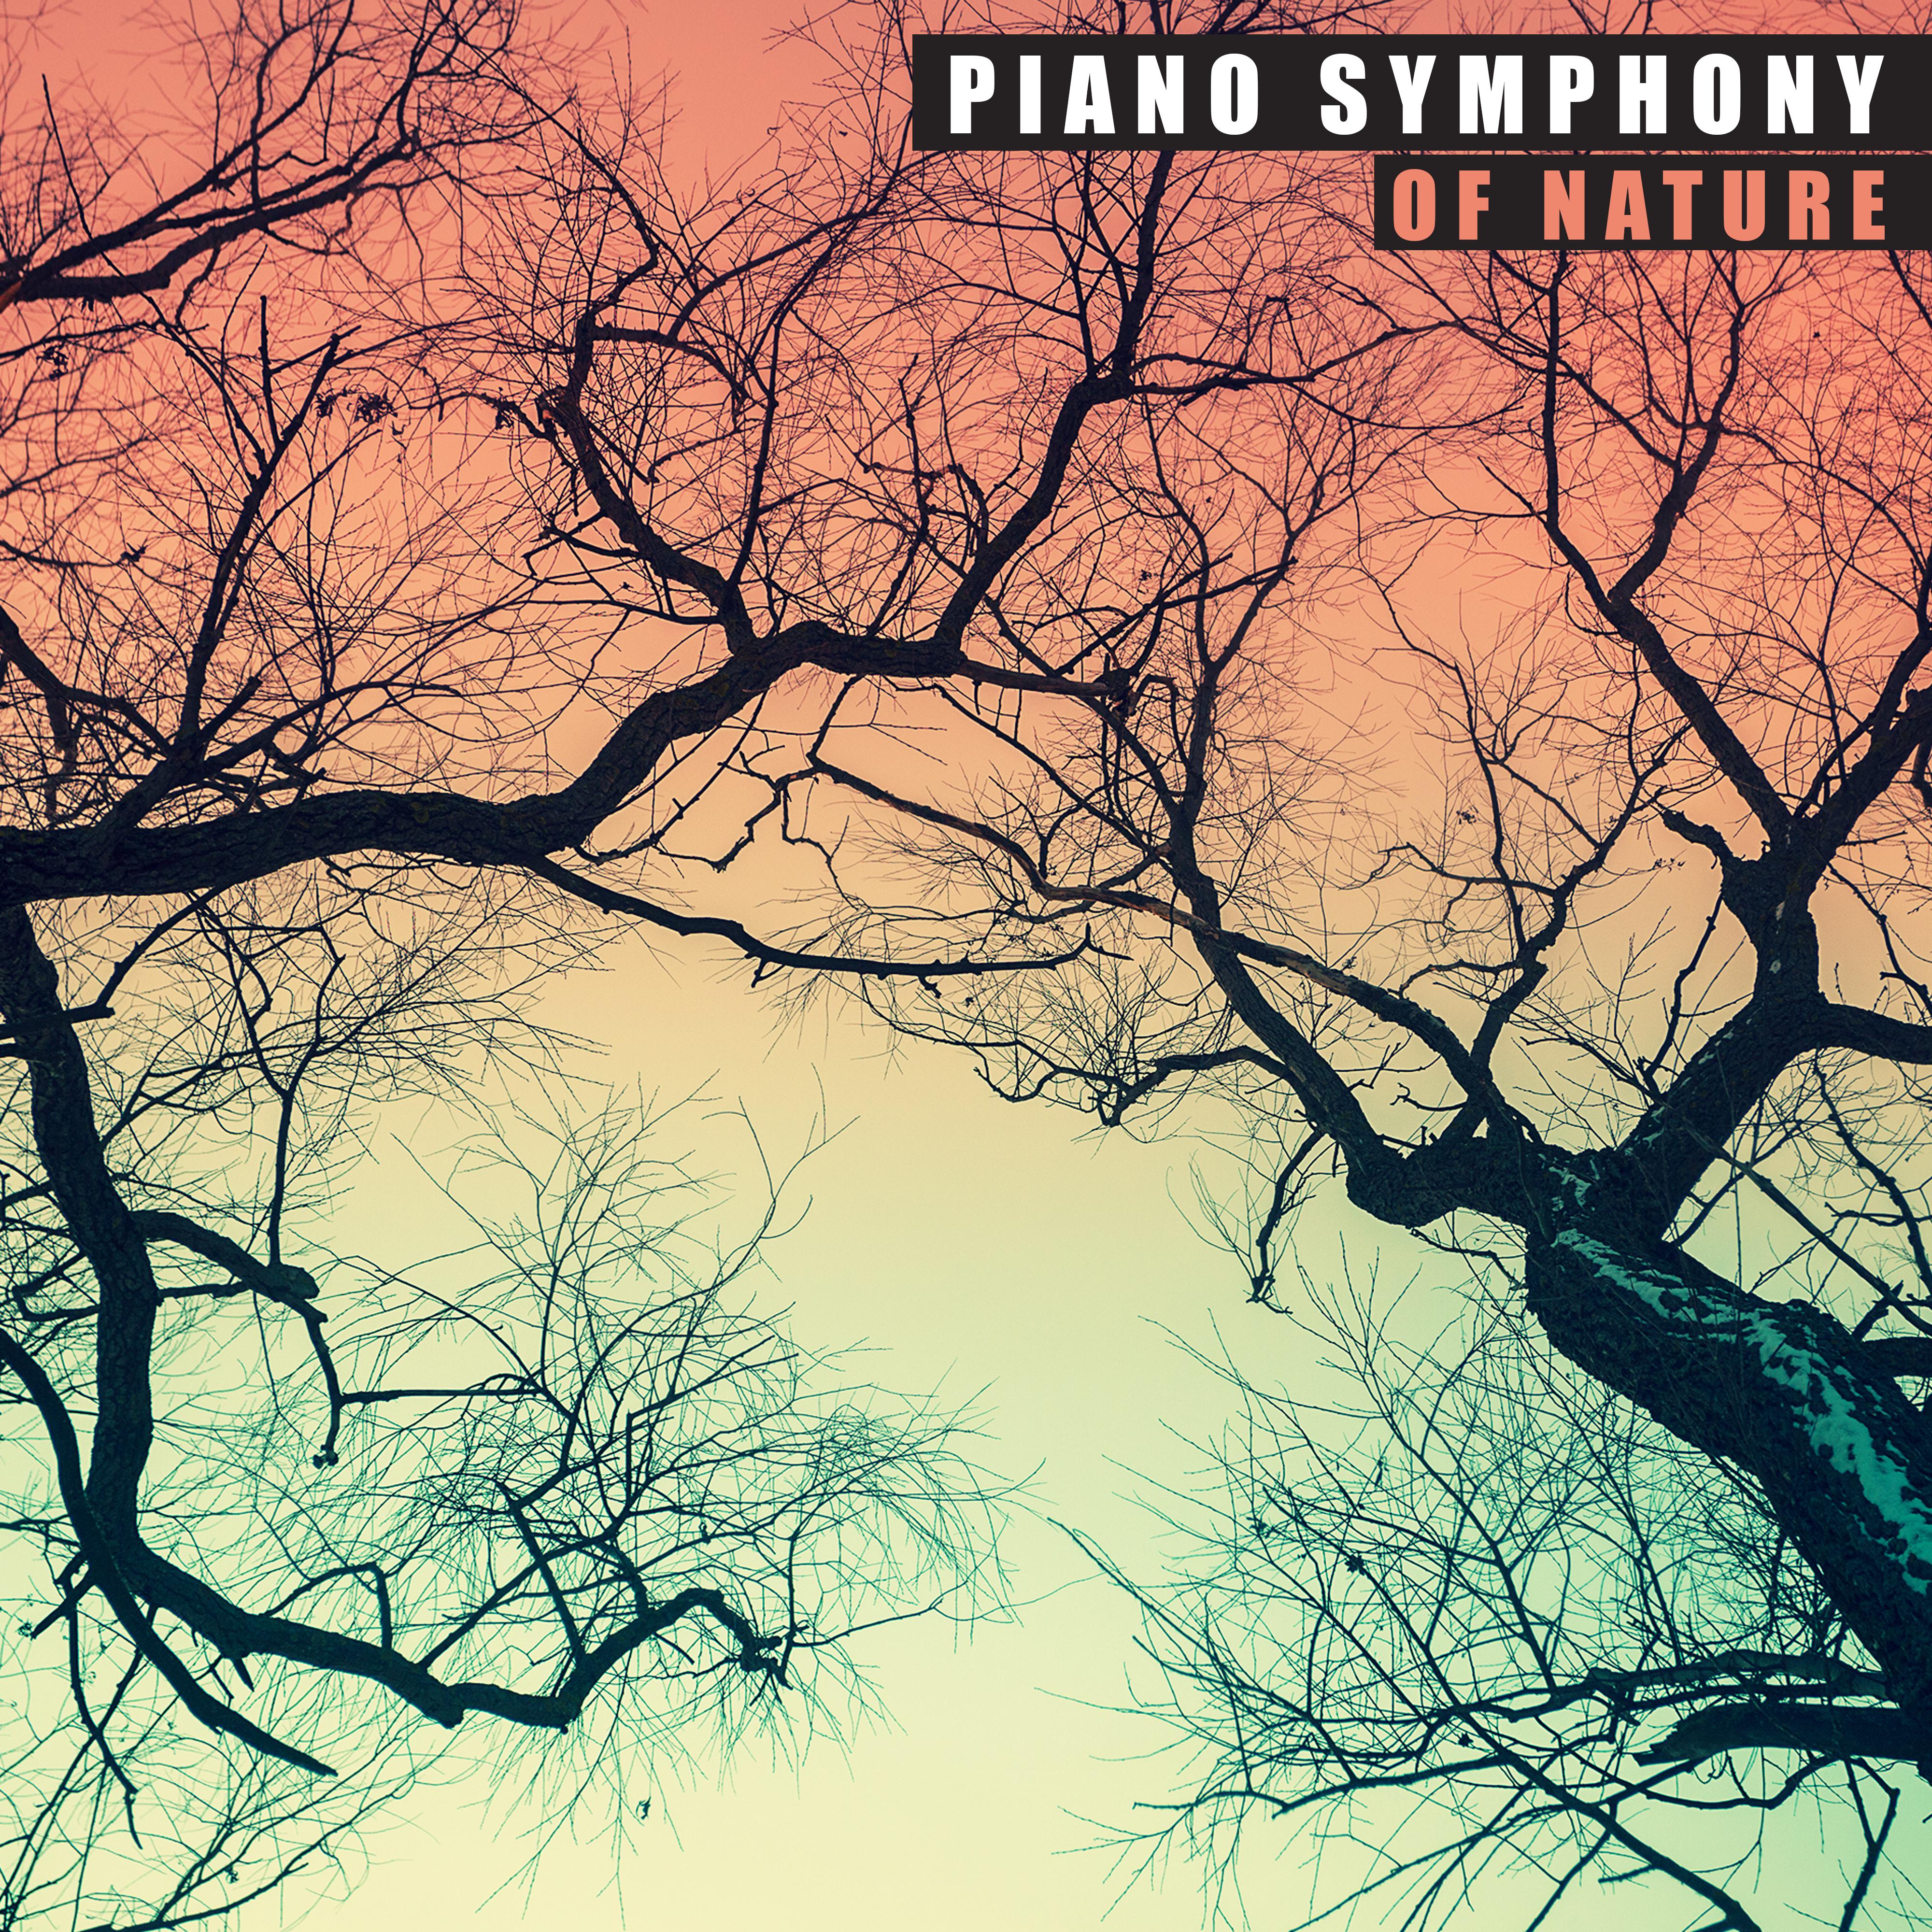 Piano Symphony of Nature: 15 Fresh New Age Songs with Nature Sounds for Total Relax, De-Stress & Calm Down After Tough Day